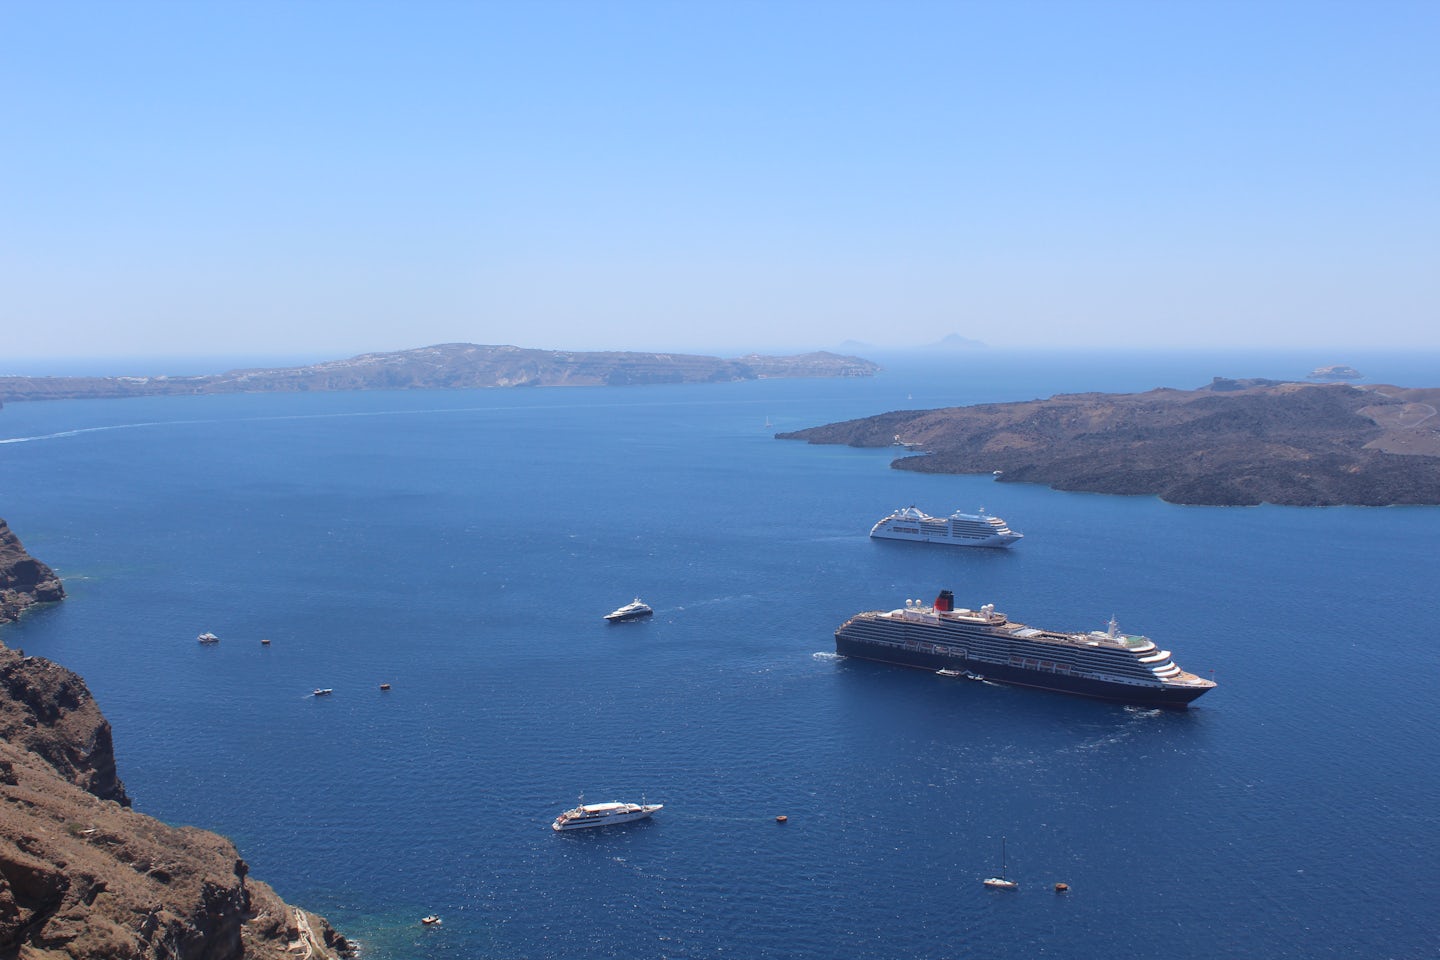 View of the ship from Santorini